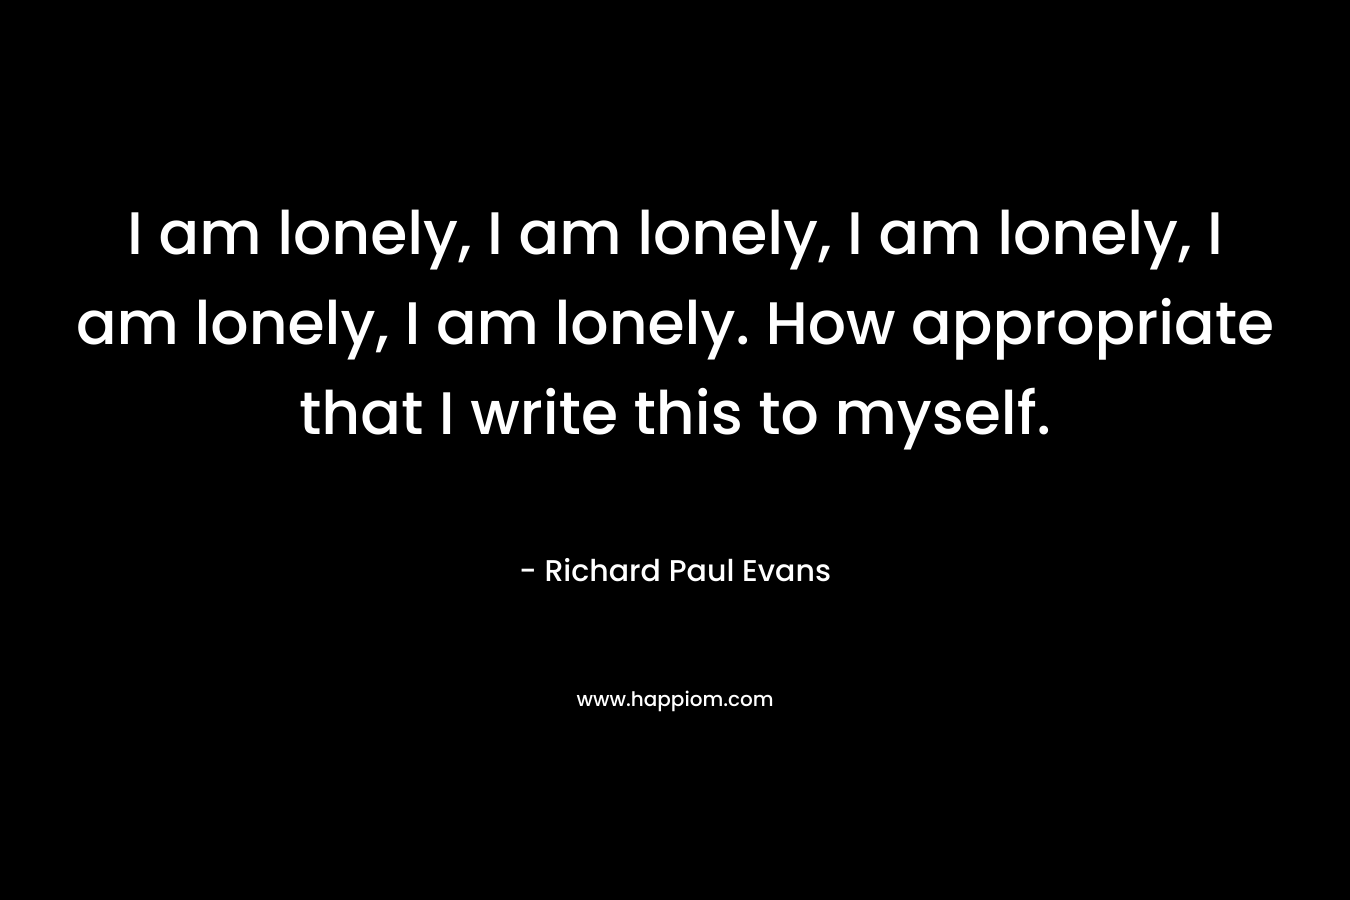 I am lonely, I am lonely, I am lonely, I am lonely, I am lonely. How appropriate that I write this to myself.